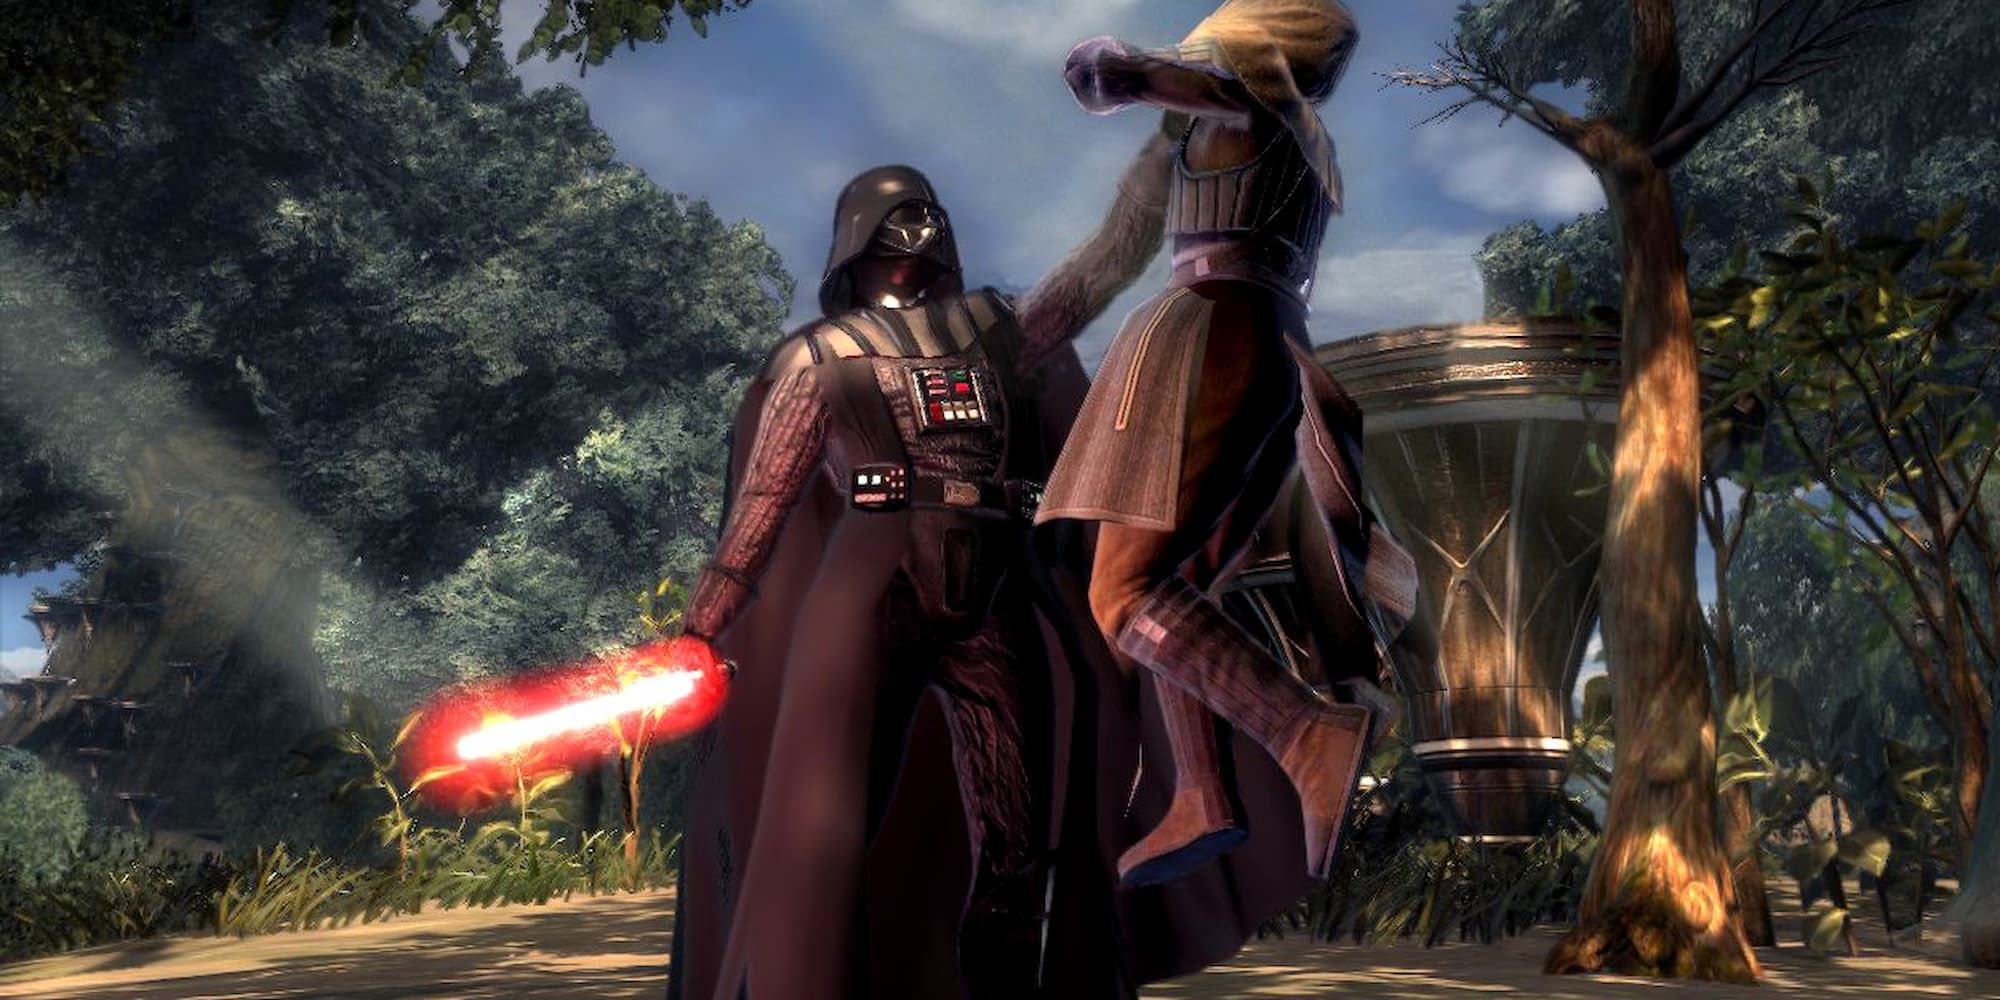 Vader choking Kento in Star Wars: the Force Unleashed